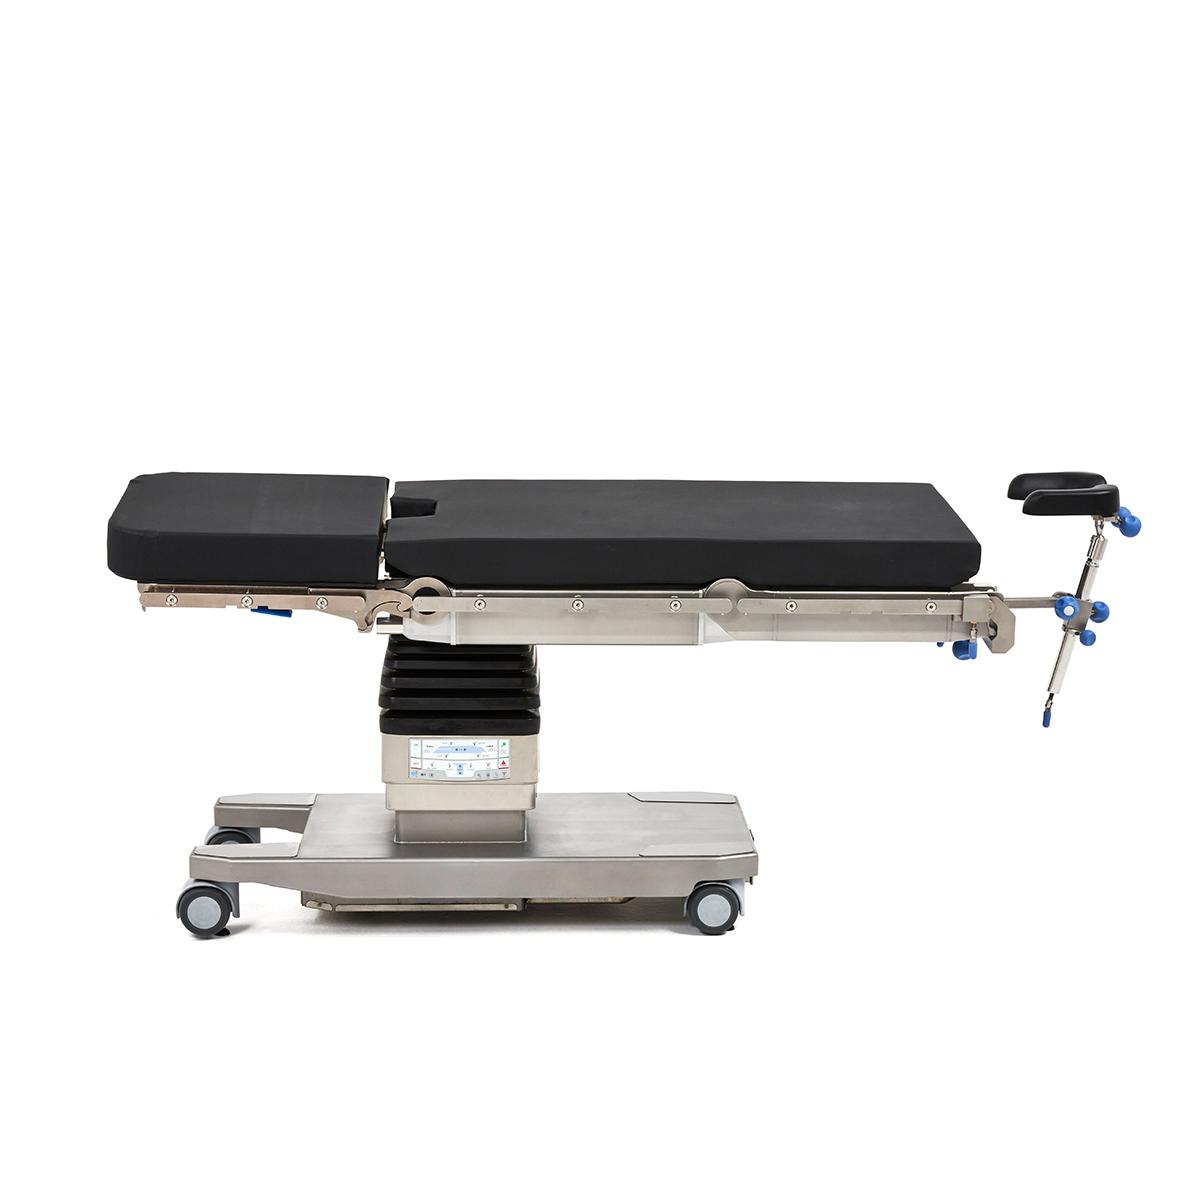 Hillrom surgical table equipped with ENT or ophthalmic headrest.